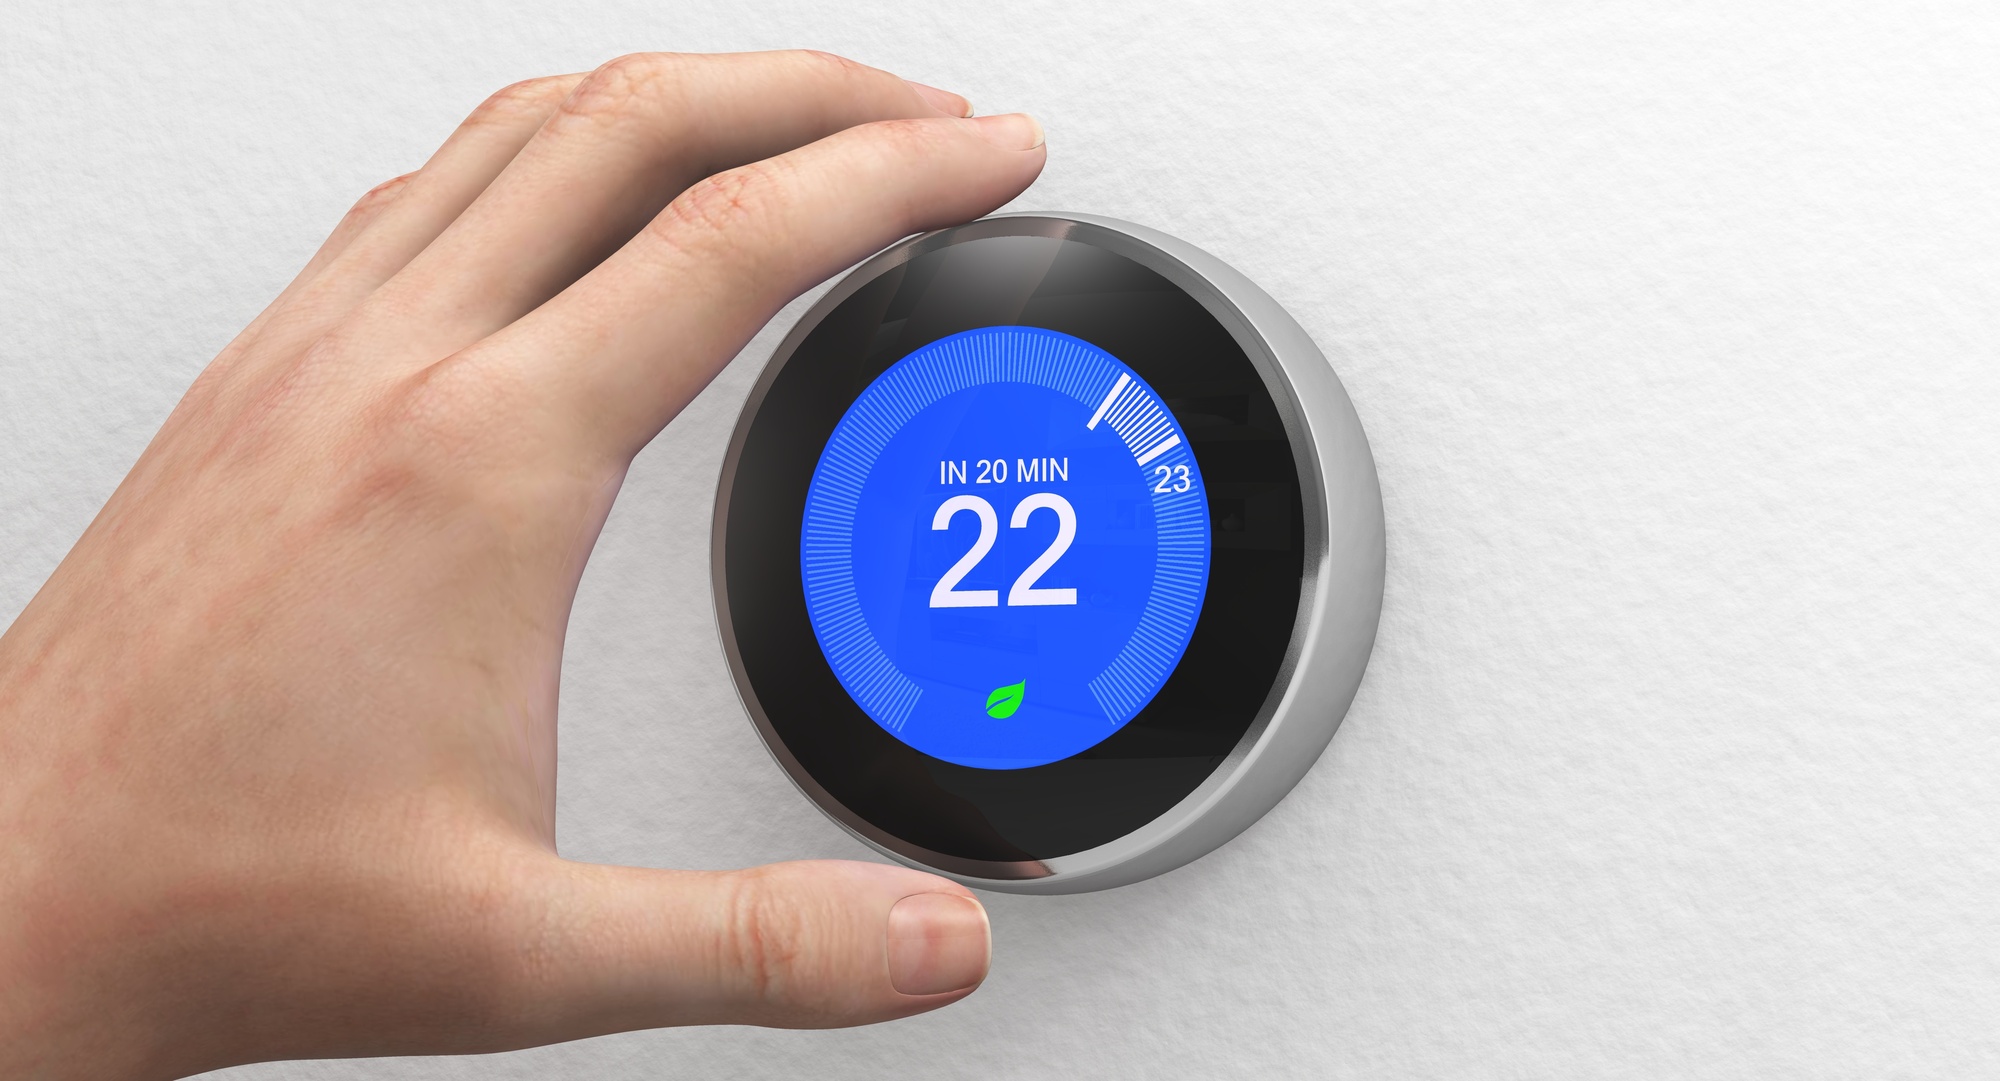 When you want to reduce your monthly energy bills but also stay comfortable, discover the best thermostat temperature to set.